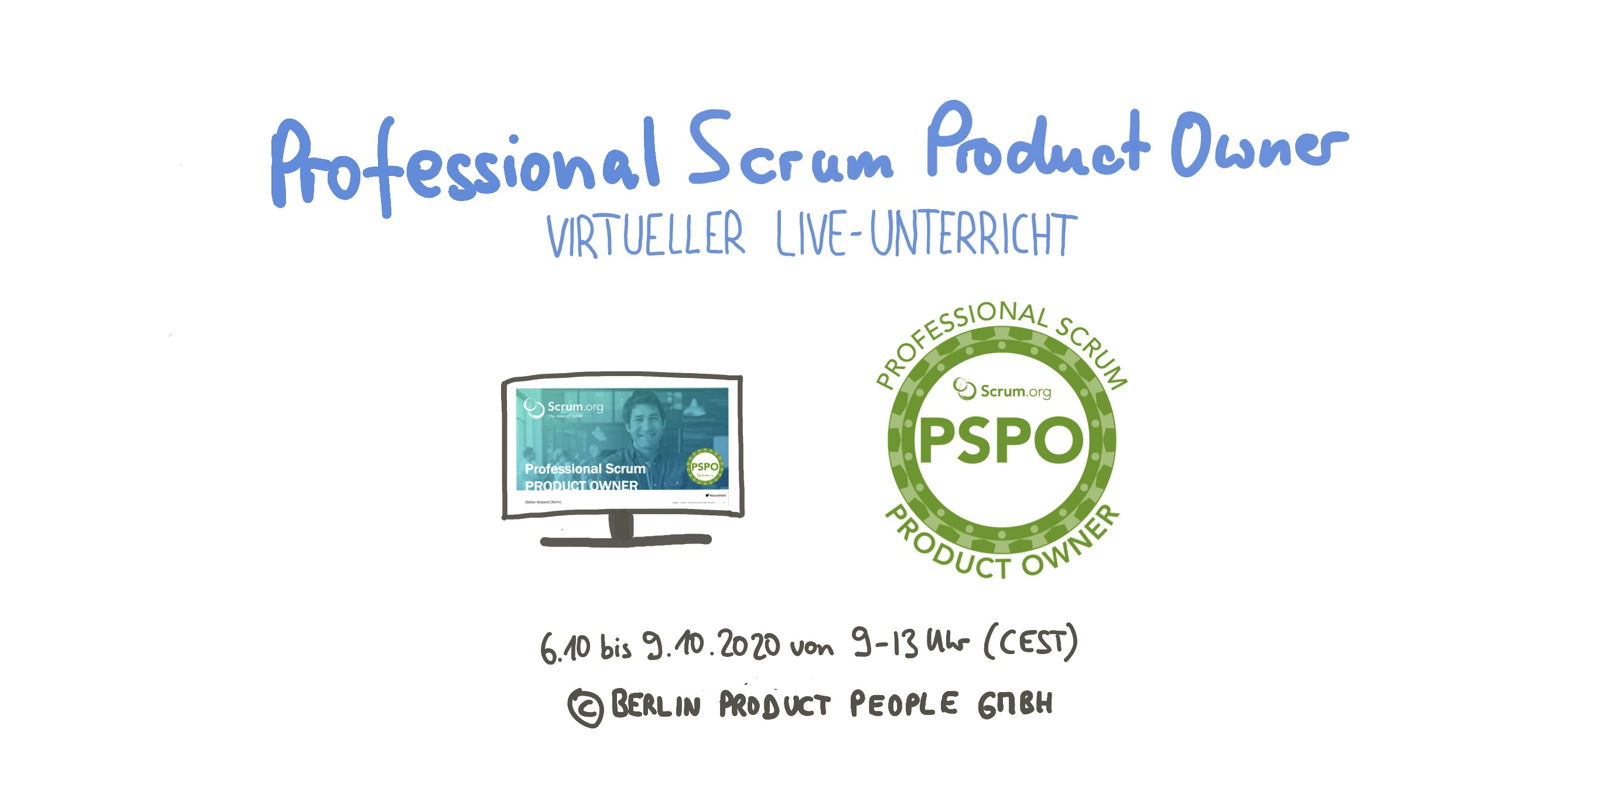 Professional Scrum Product Owner Training — Online im Oktober 2020 — Berlin Product People GmbH